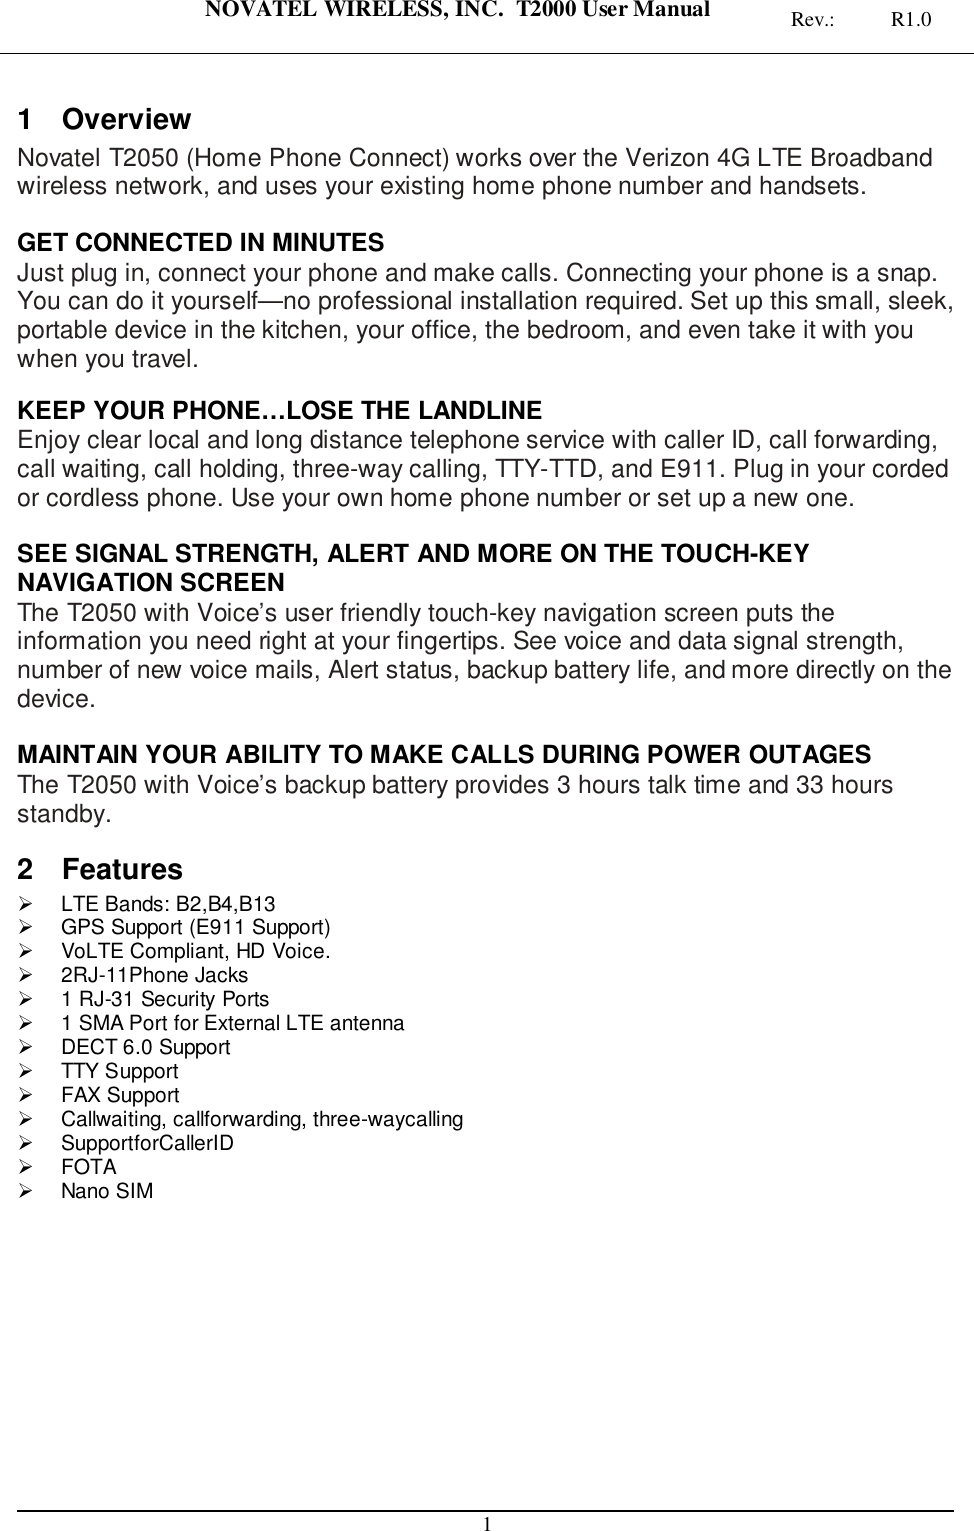 NOVATEL WIRELESS, INC. T2000 User Manual Rev.: R1.011 OverviewNovatel T2050 (Home Phone Connect) works over the Verizon 4G LTE Broadbandwireless network, and uses your existing home phone number and handsets.GET CONNECTED IN MINUTESJust plug in, connect your phone and make calls. Connecting your phone is a snap.You can do it yourself—no professional installation required. Set up this small, sleek,portable device in the kitchen, your office, the bedroom, and even take it with youwhen you travel.KEEP YOUR PHONE…LOSE THE LANDLINEEnjoy clear local and long distance telephone service with caller ID, call forwarding,call waiting, call holding, three-way calling, TTY-TTD, and E911. Plug in your cordedor cordless phone. Use your own home phone number or set up a new one.SEE SIGNAL STRENGTH, ALERT AND MORE ON THE TOUCH-KEYNAVIGATION SCREENThe T2050 with Voice’s user friendly touch-key navigation screen puts theinformation you need right at your fingertips. See voice and data signal strength,number of new voice mails, Alert status, backup battery life, and more directly on thedevice.MAINTAIN YOUR ABILITY TO MAKE CALLS DURING POWER OUTAGESThe T2050 with Voice’s backup battery provides 3 hours talk time and 33 hoursstandby.2 FeaturesLTE Bands: B2,B4,B13GPS Support (E911 Support)VoLTE Compliant, HD Voice.2RJ-11Phone Jacks1 RJ-31 Security Ports1 SMA Port for External LTE antennaDECT 6.0 SupportTTY SupportFAX SupportCallwaiting, callforwarding, three-waycallingSupportforCallerIDFOTANano SIM